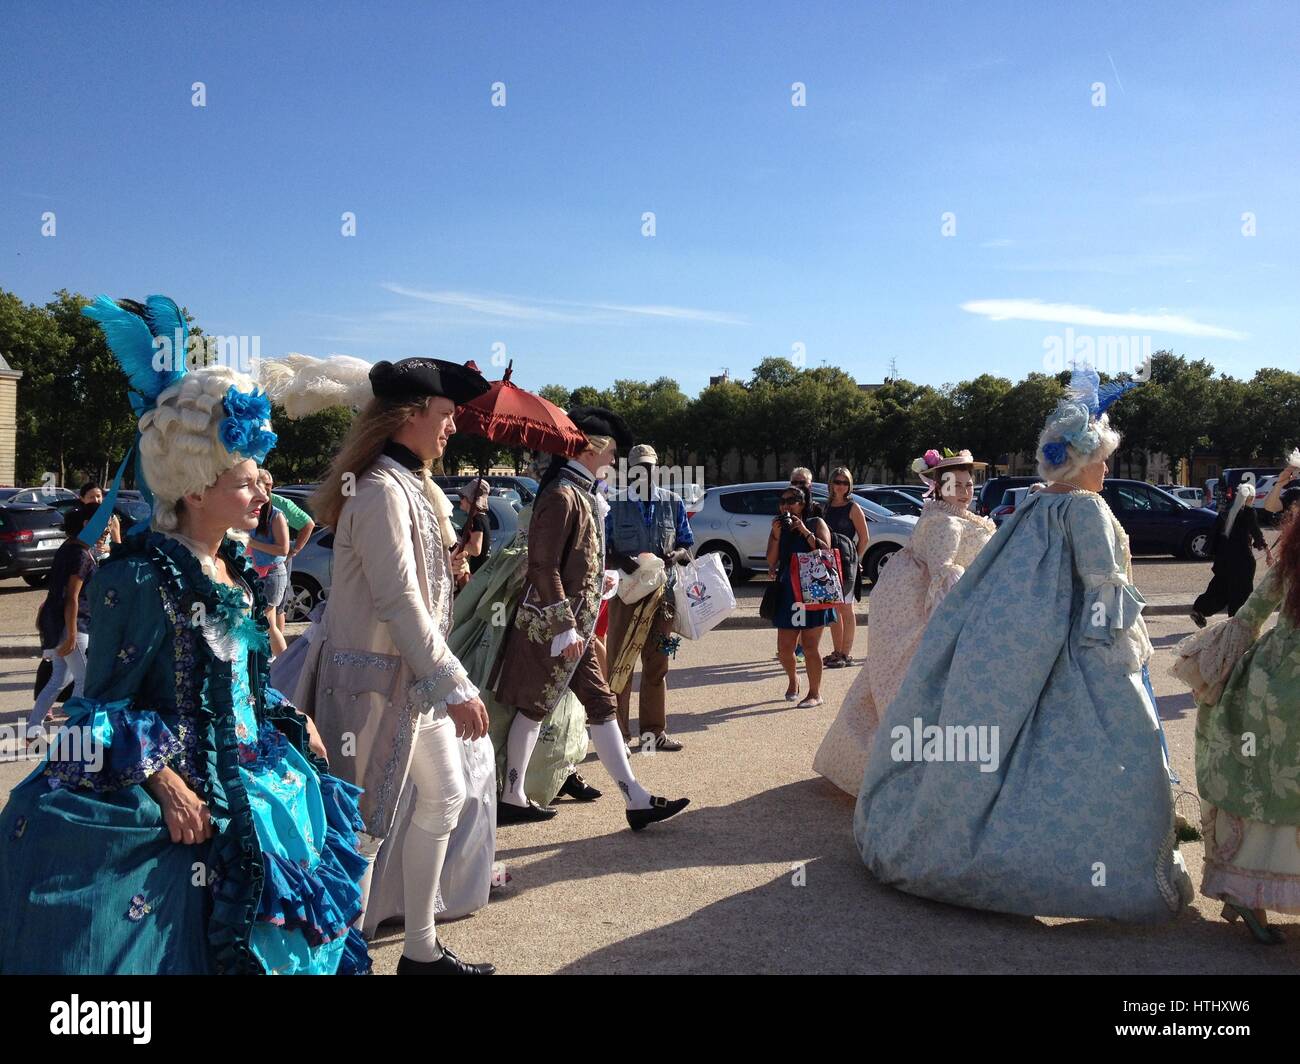 Versailles, France - 27 June 2015: Guests arrive for the The Grand Masked Ball at the Palace of Versailles. People in full 18th century costume walk u Stock Photo